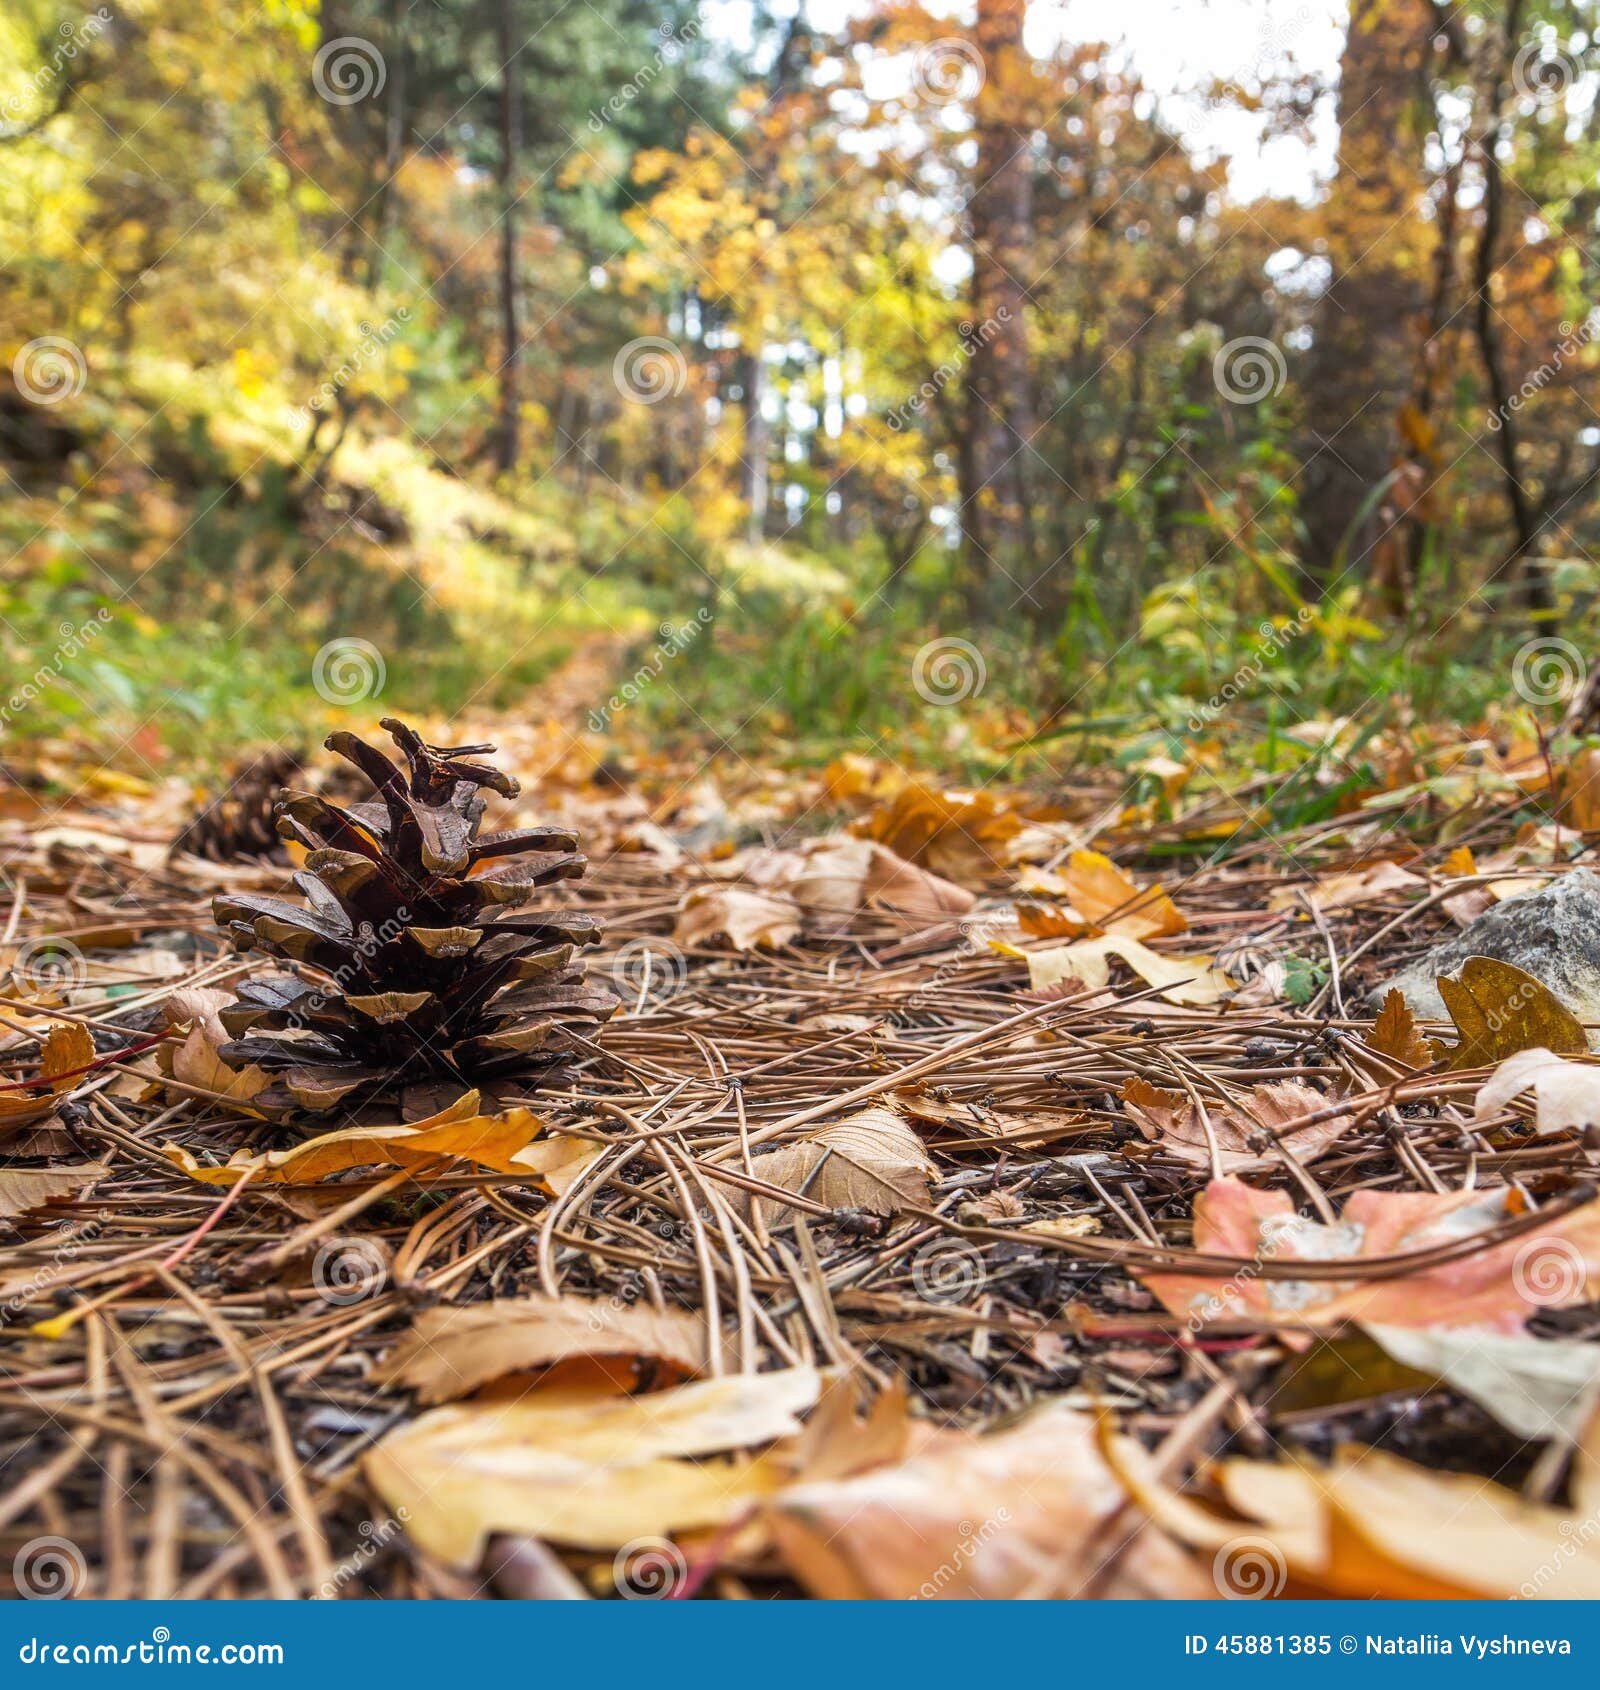 pinecone in the fallen leaves